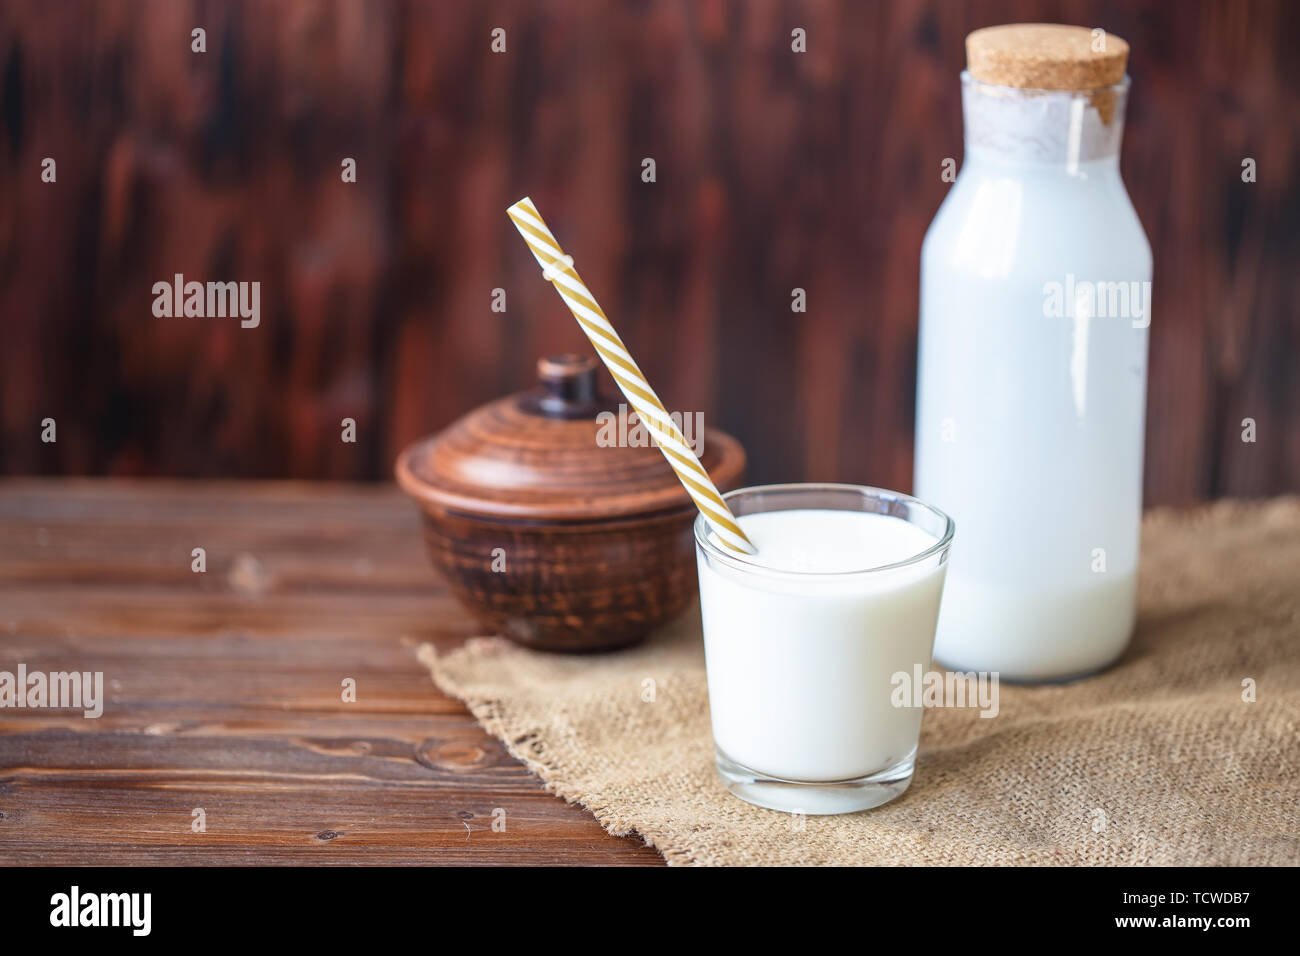 Homemade kefir, yogurt with probiotics in a glass on table Probiotic cold fermented dairy drink Trendy food and drink Copy space Rustic style. Stock Photo